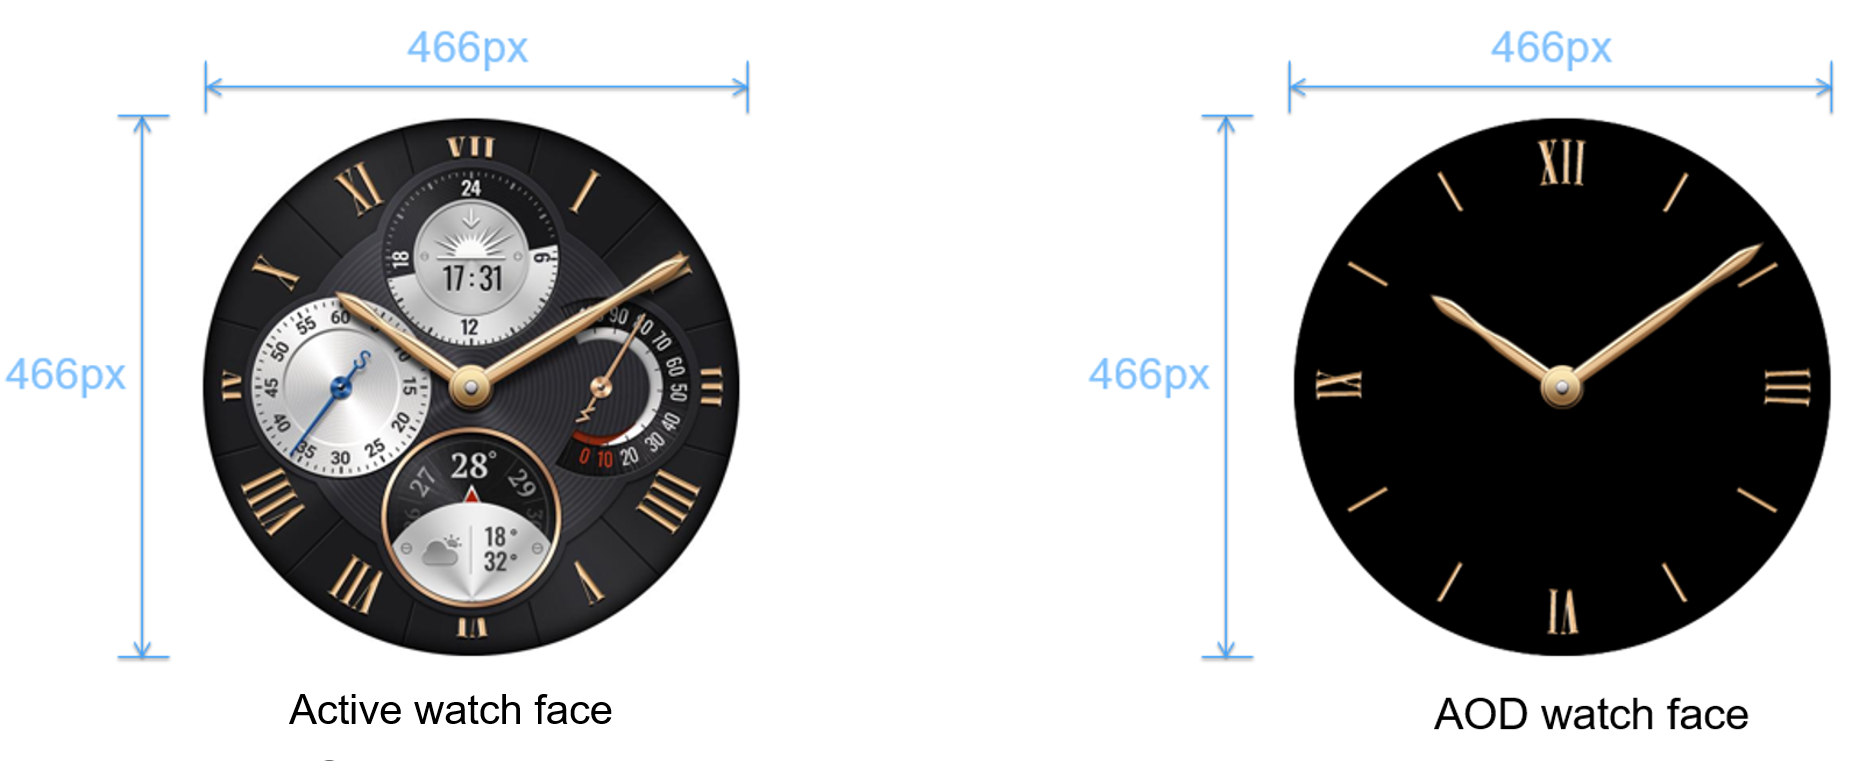 HUAWEI WATCH Series Watch Face Design Guide and Specifications-Smart Watch-Watch  Face Themes-Development Guide-HUAWEI Themes | HUAWEI Developers